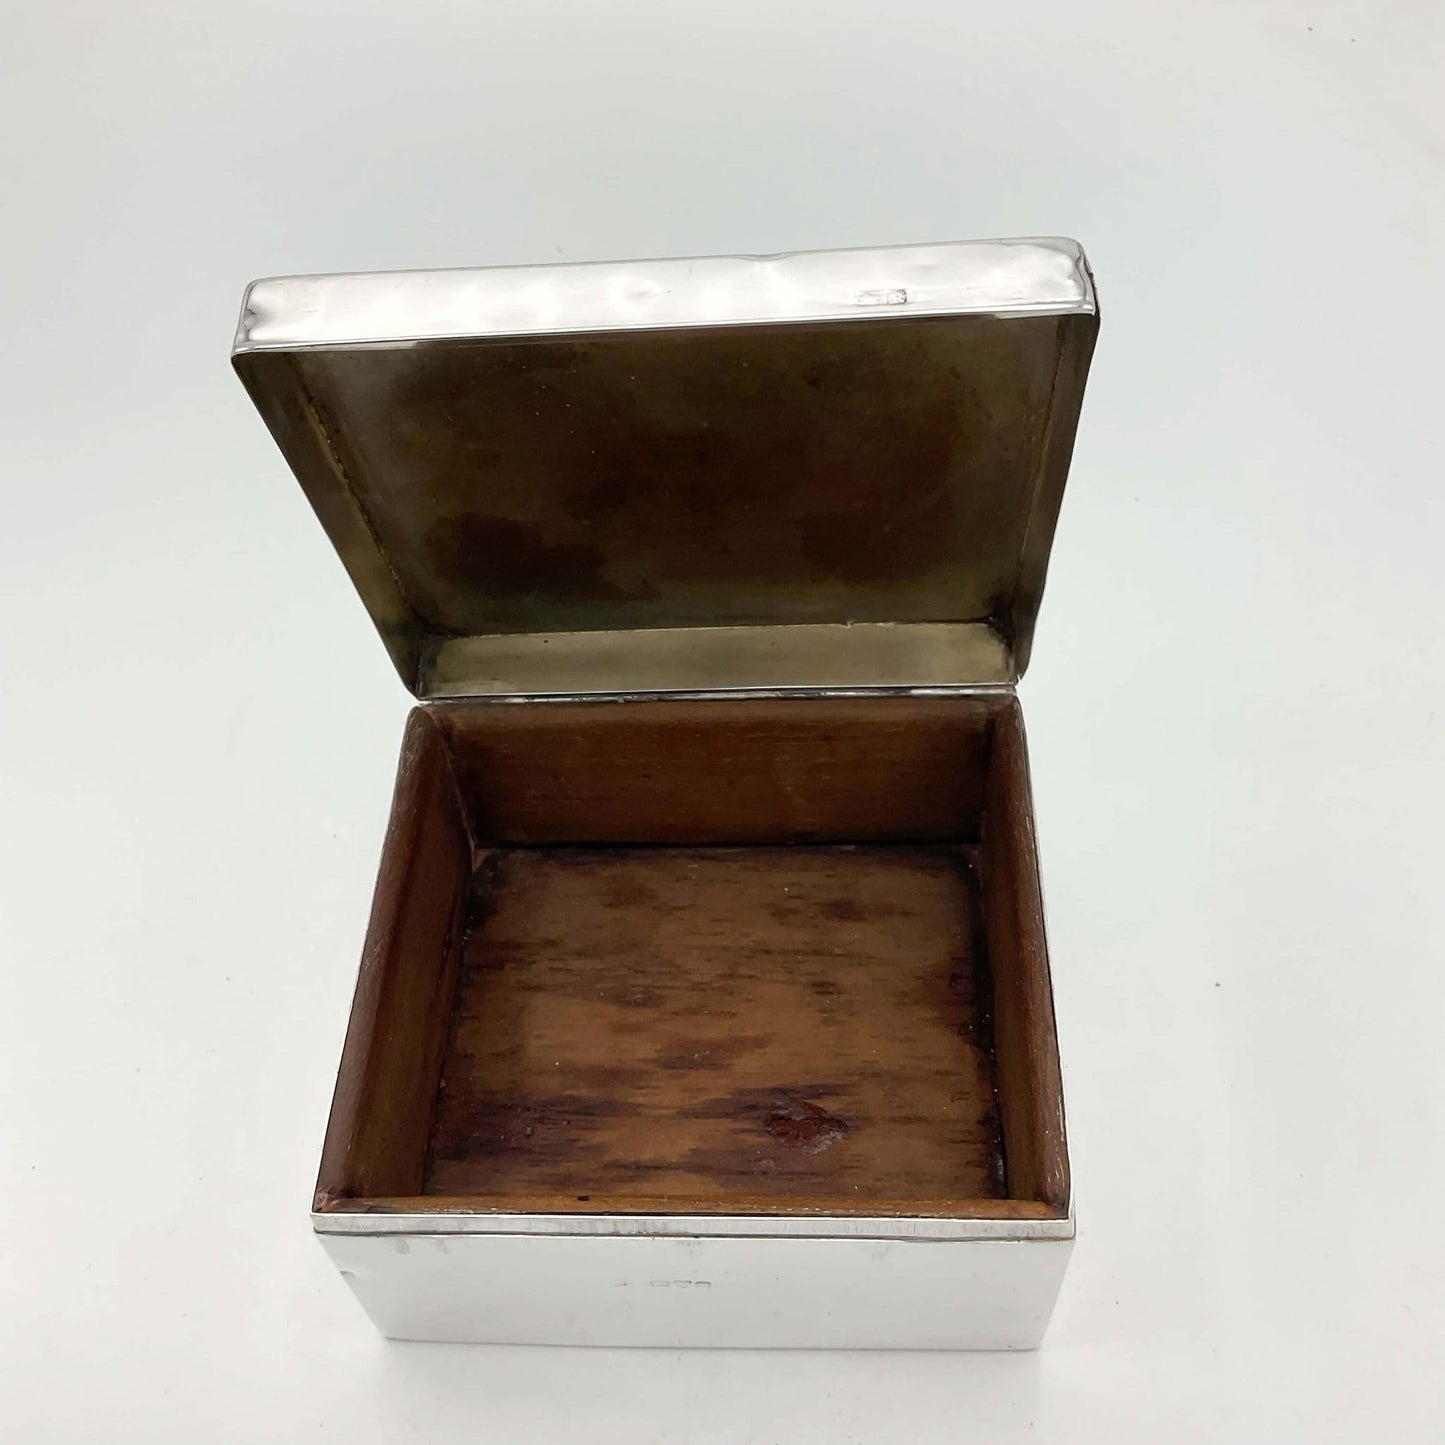 Antique Silver Cigarette Box from 1900s with the lid open showing a wooden interior base